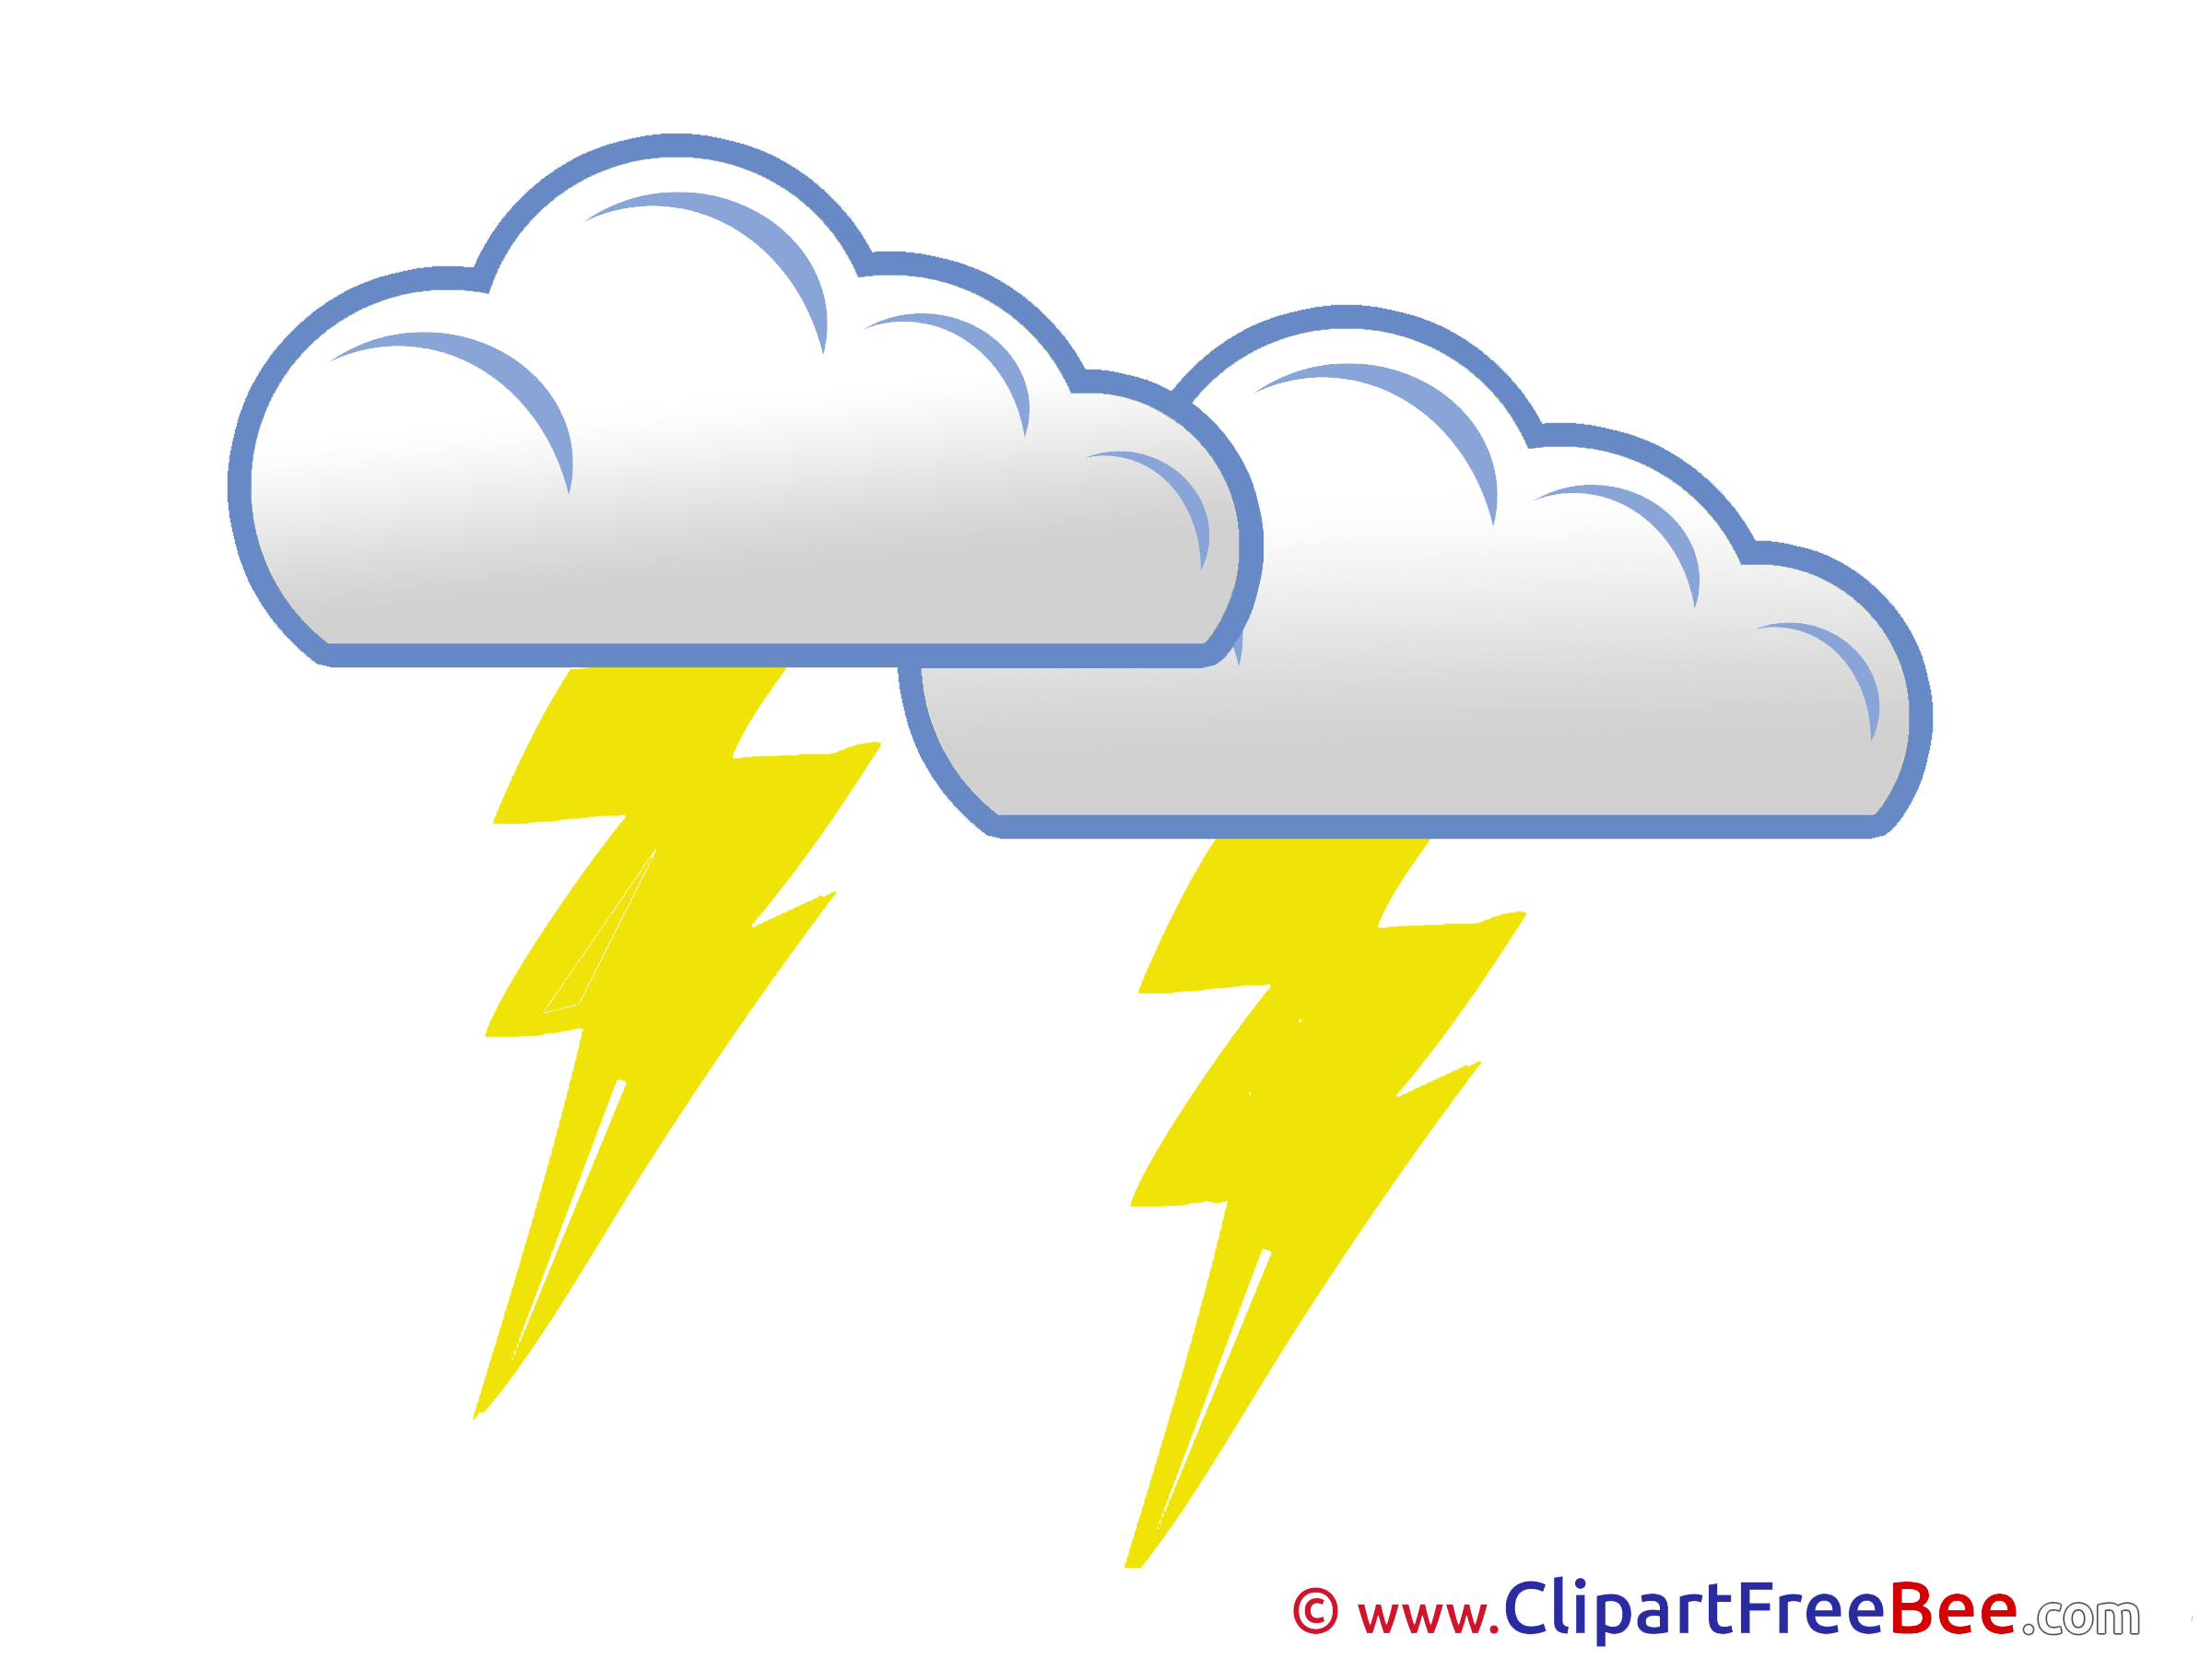 Thunderstorm Clouds Pics download Illustration